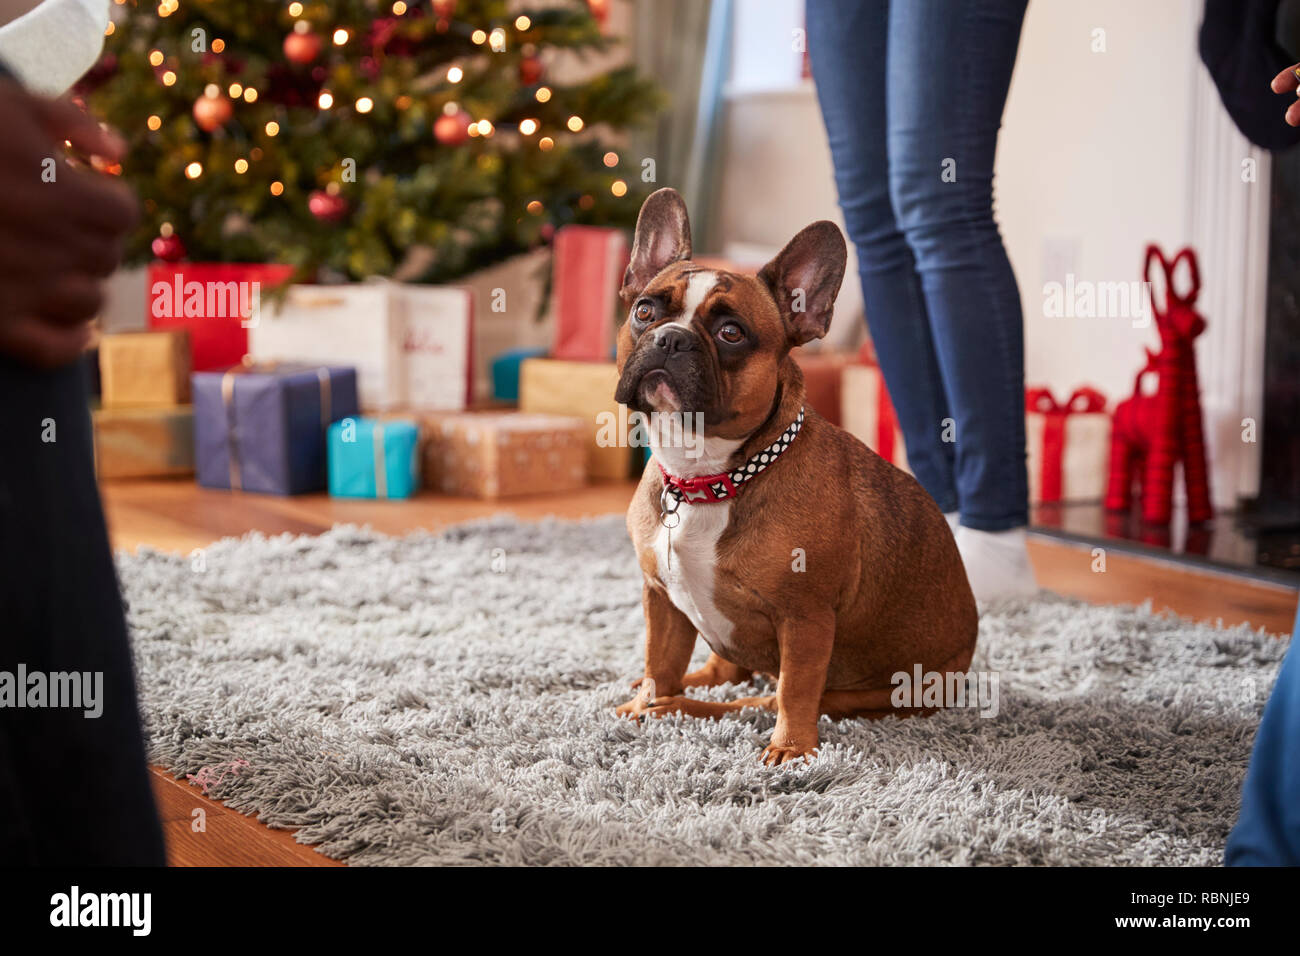 French Bulldog Sitting On Rug By Christmas Tree And Presents Stock Photo